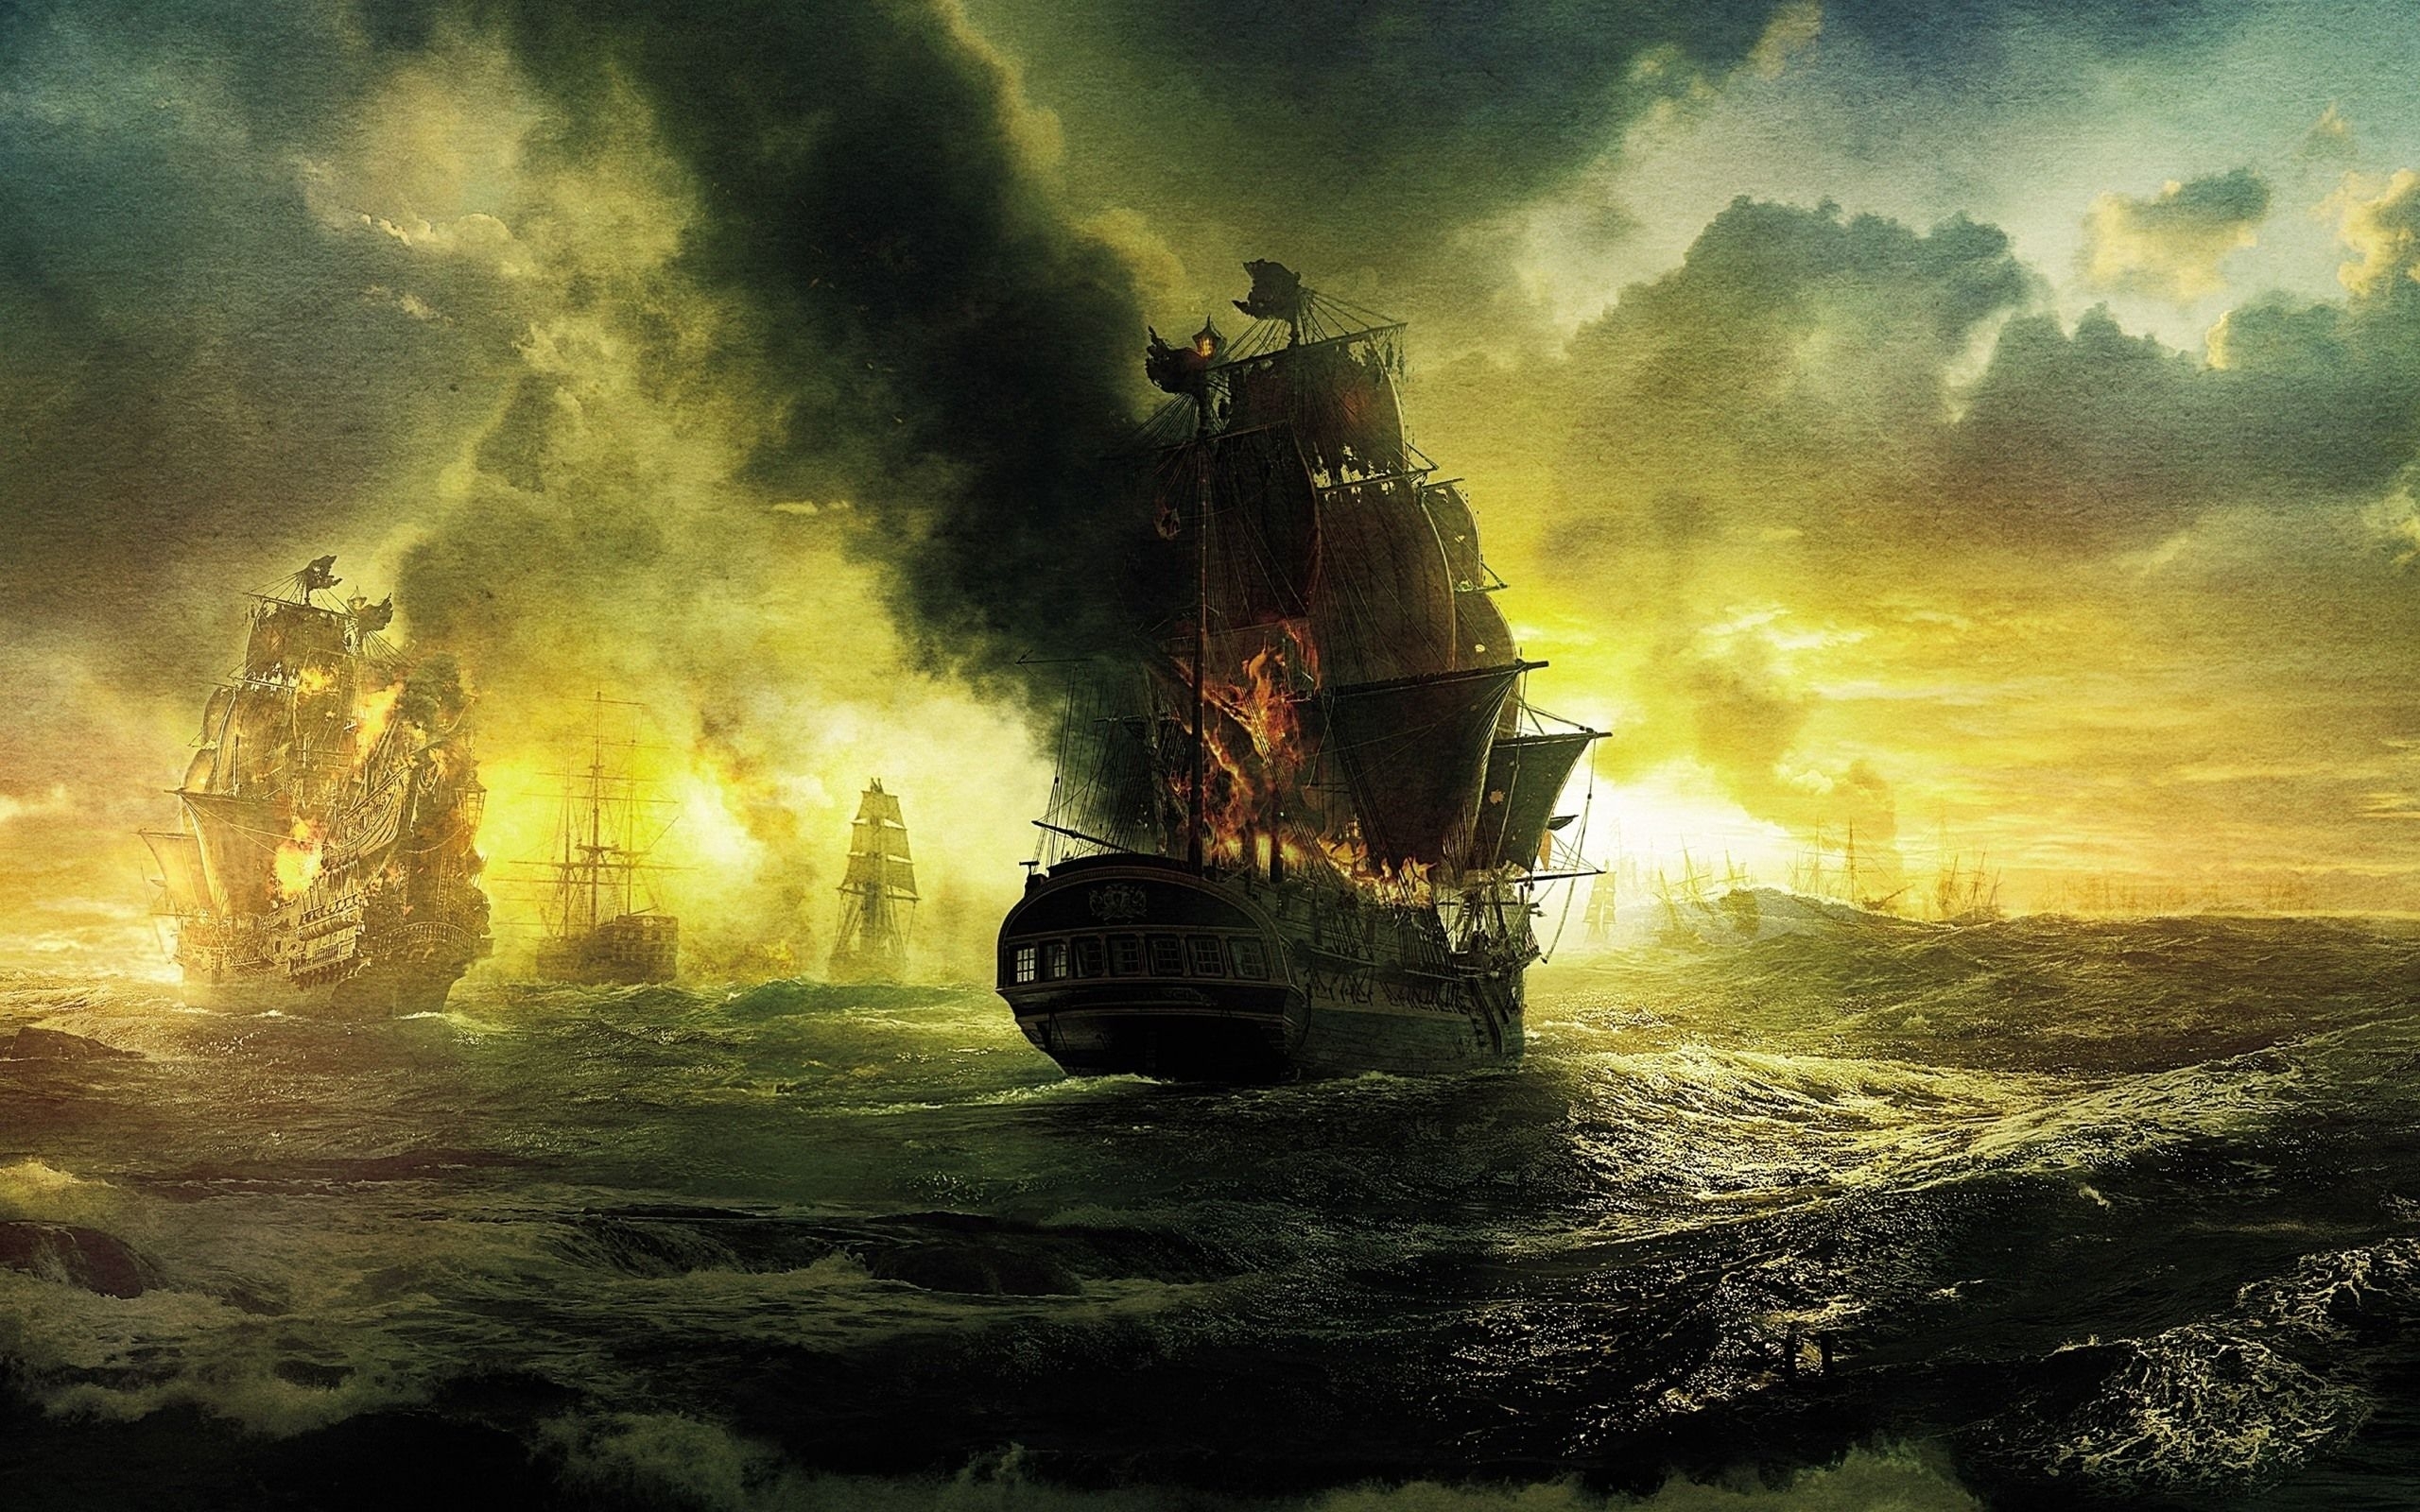 10 Latest Pirates Of The Caribbean Backgrounds FULL HD 1920×1080 For PC Background